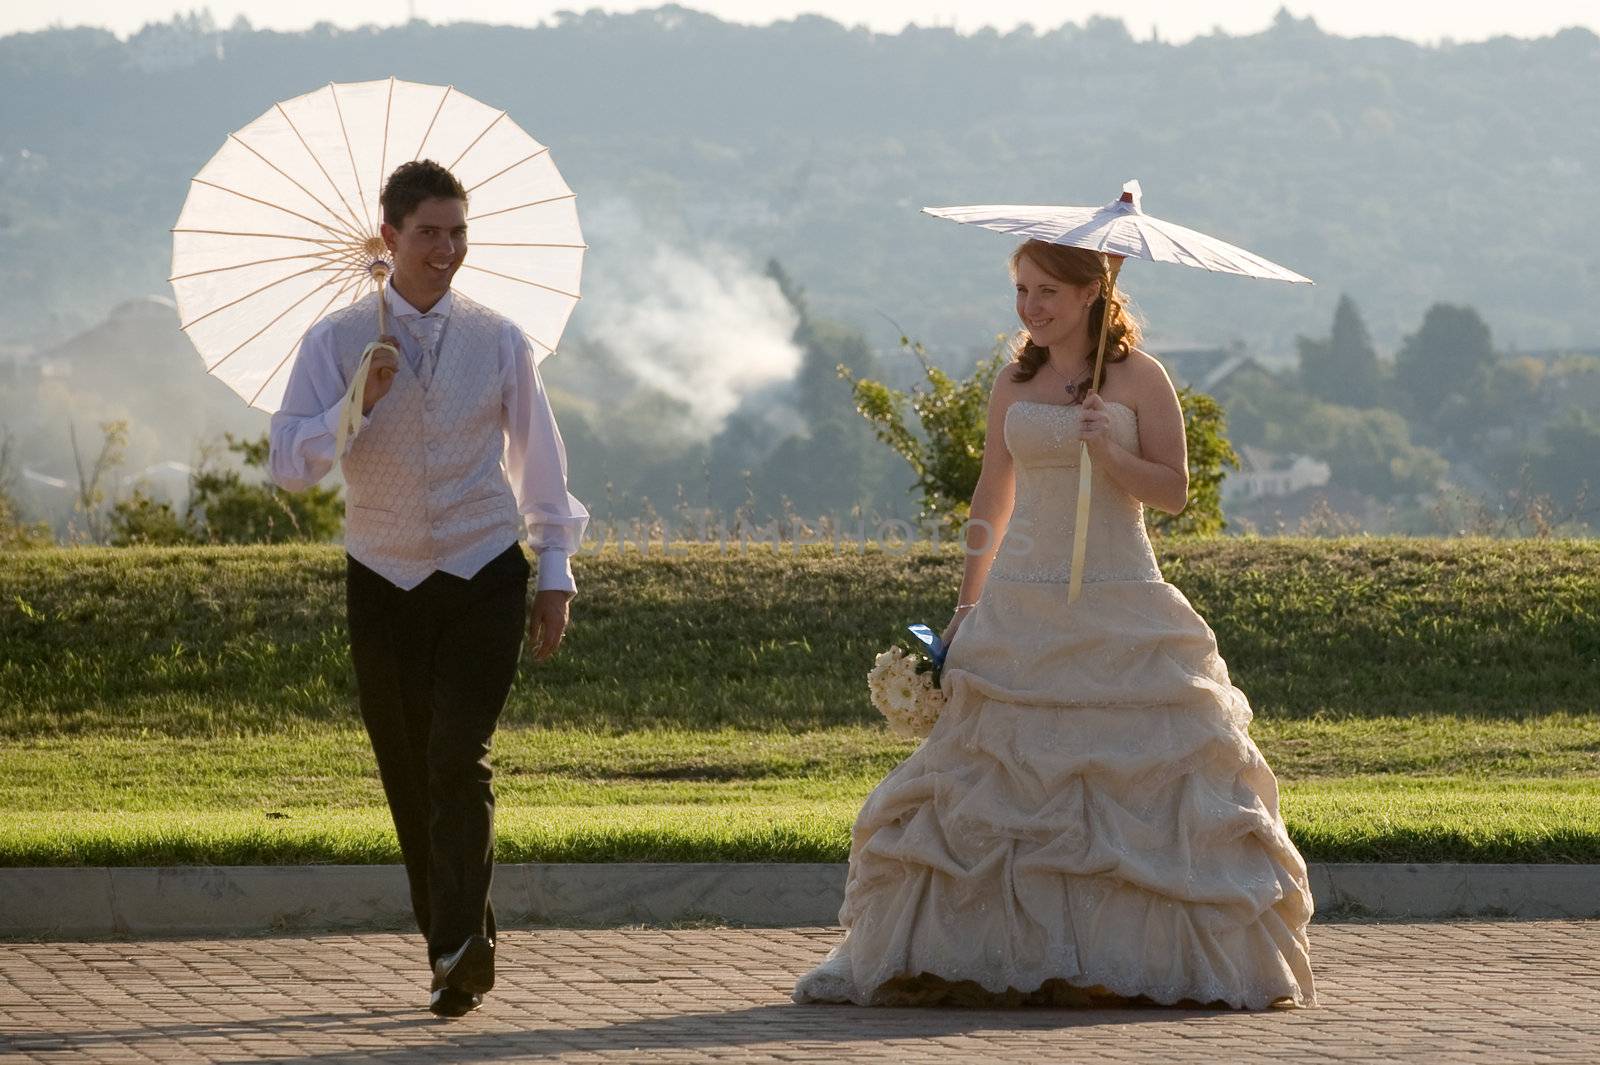 bride and groom walking outside in sun with umbrellas jumping by Ansunette